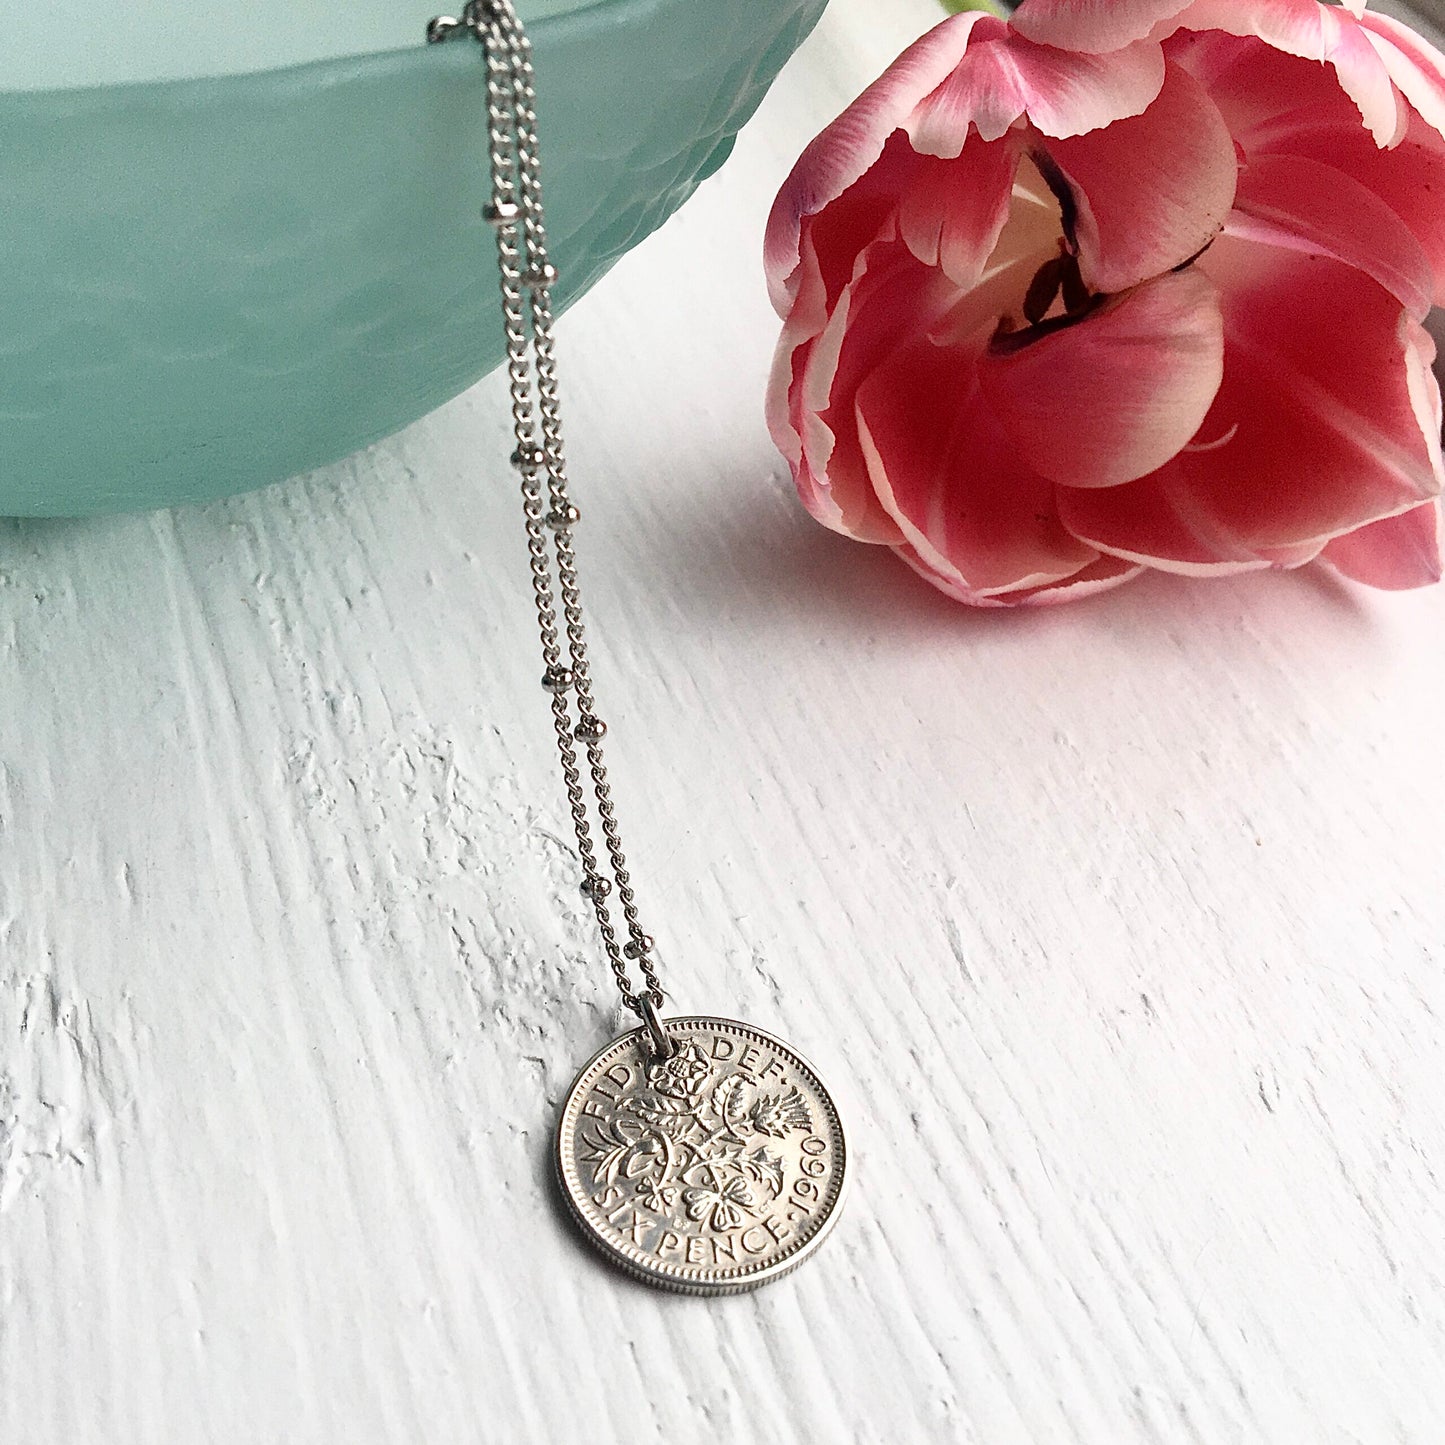 Satellite Sixpence Necklace - 1953-1967 - Steel